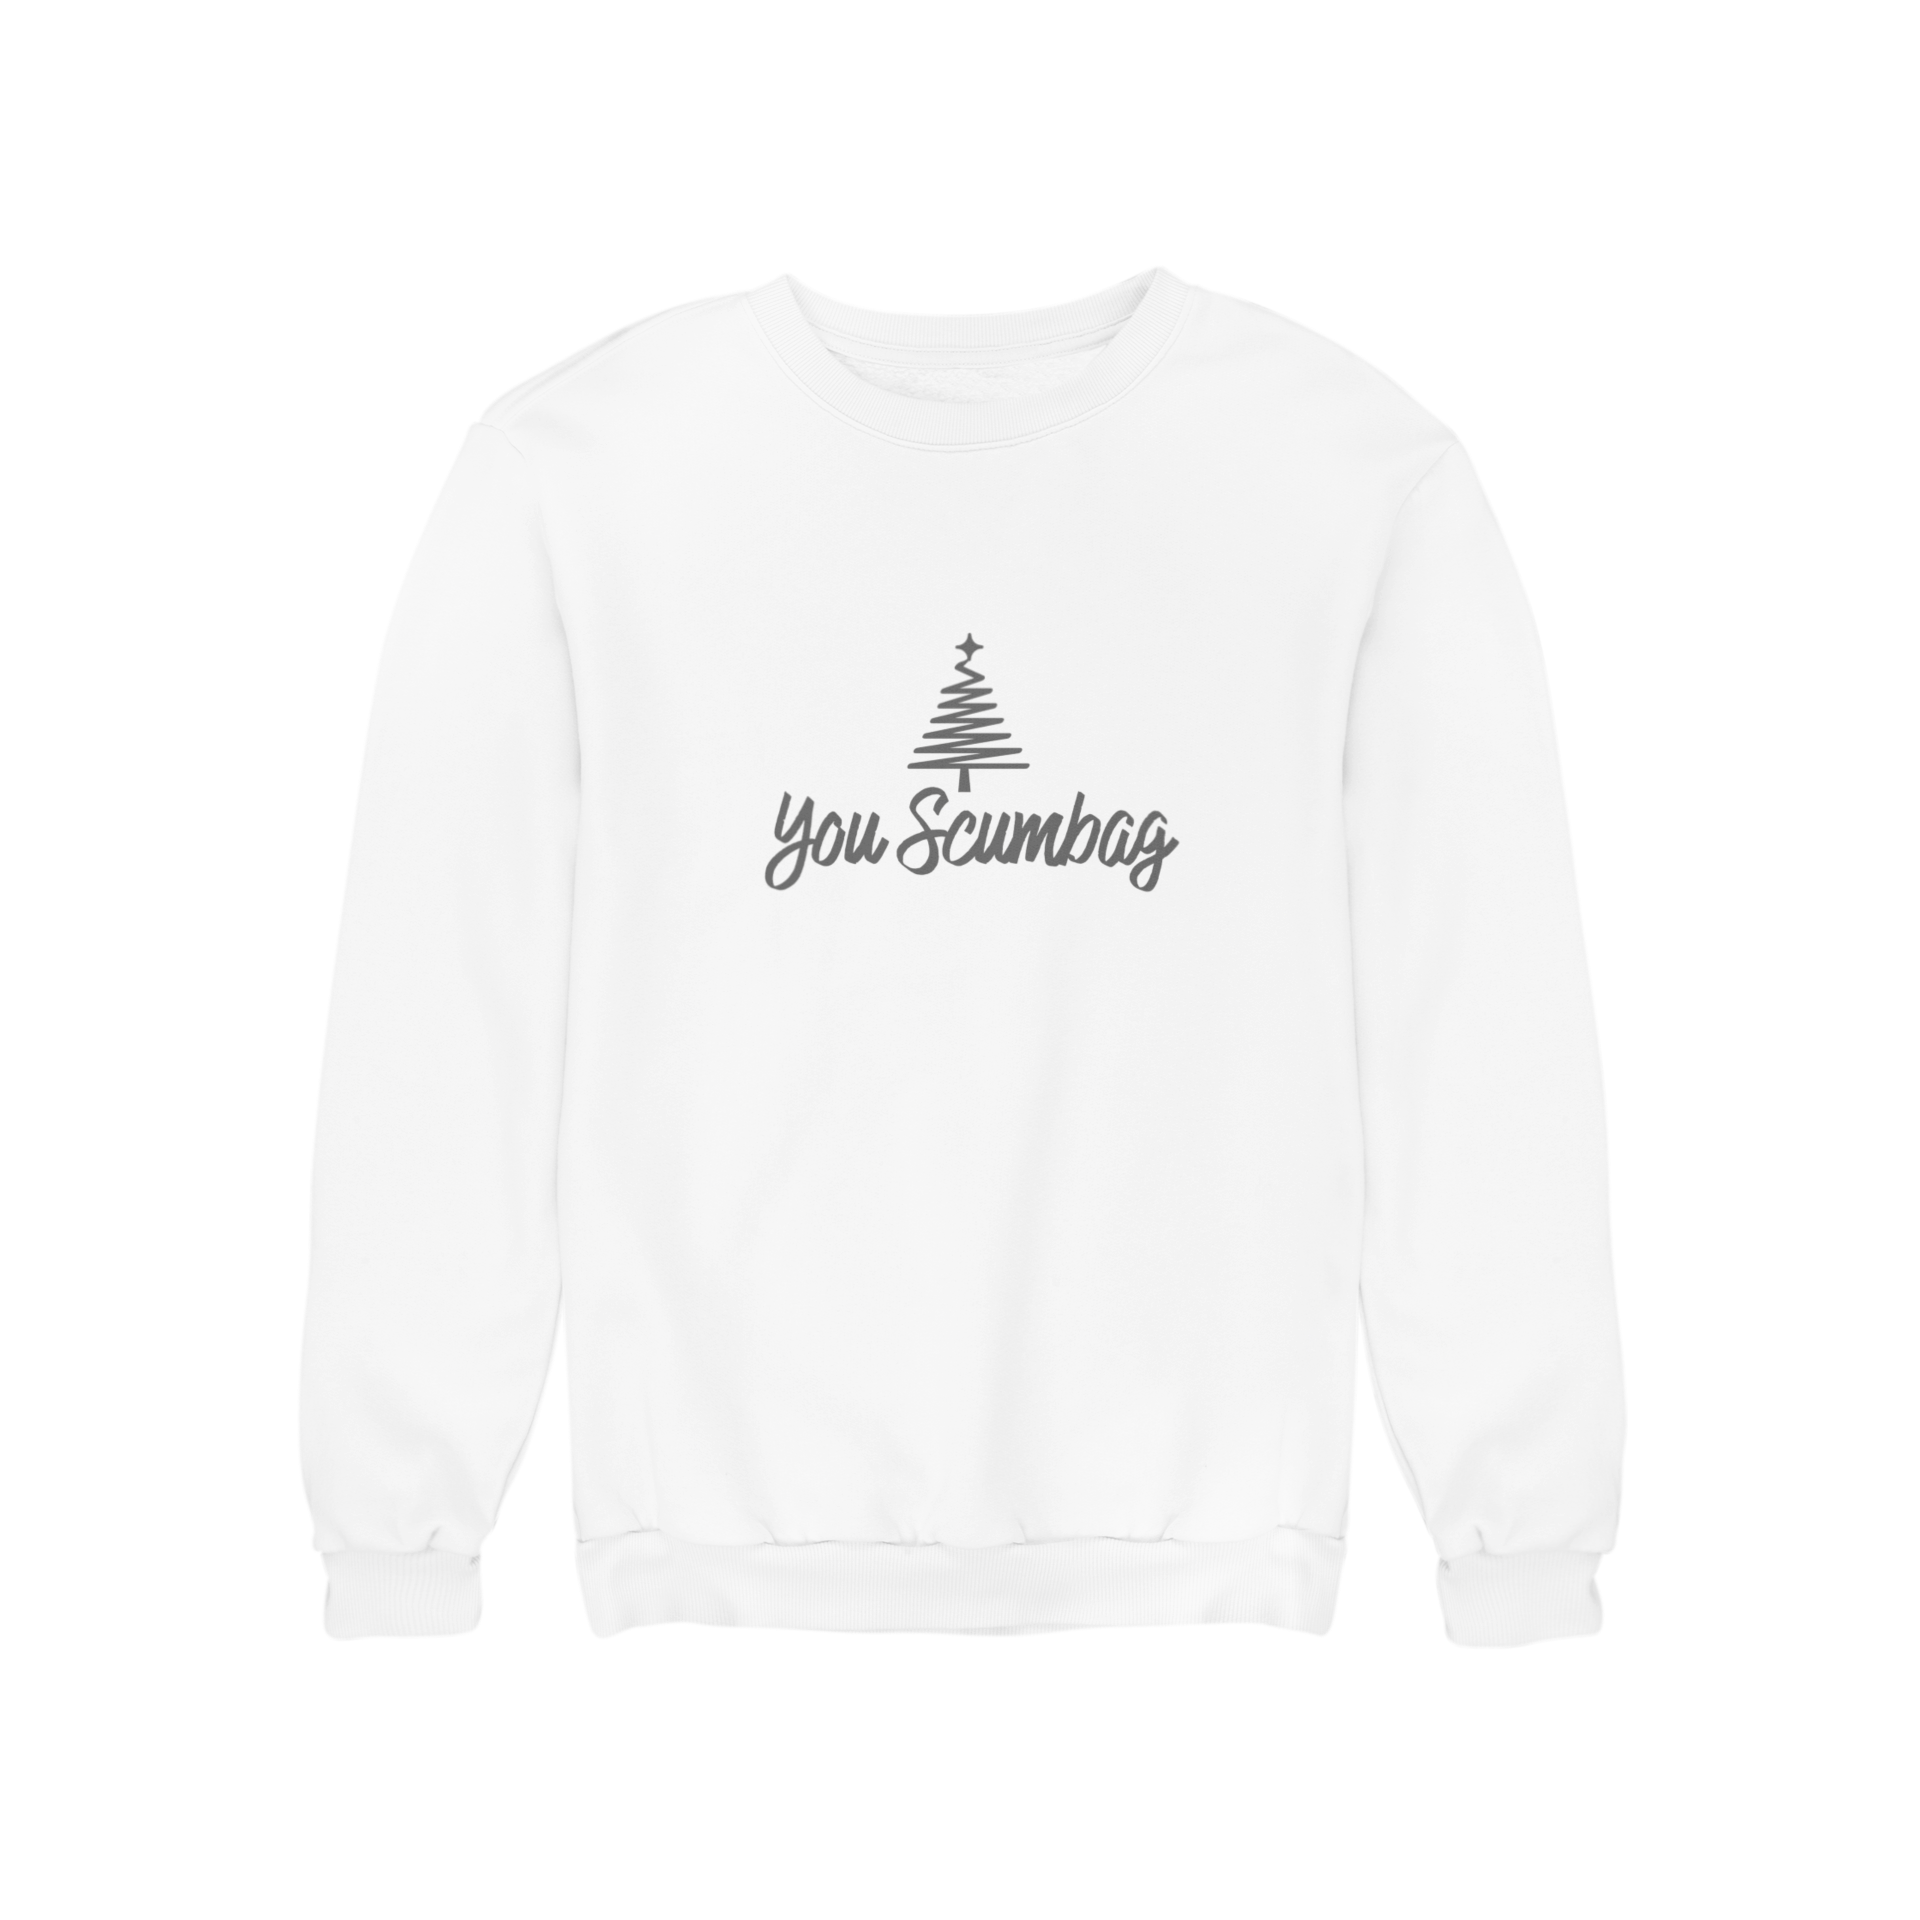 Introducing the You Scumbag Jumper - the perfect addition to your holiday wardrobe! Made with a cozy and festive material, this Christmas jumper features the iconic lyrics from the beloved song "Fairytale of New York". Spread holiday cheer while staying warm and stylish with this must-have jumper.